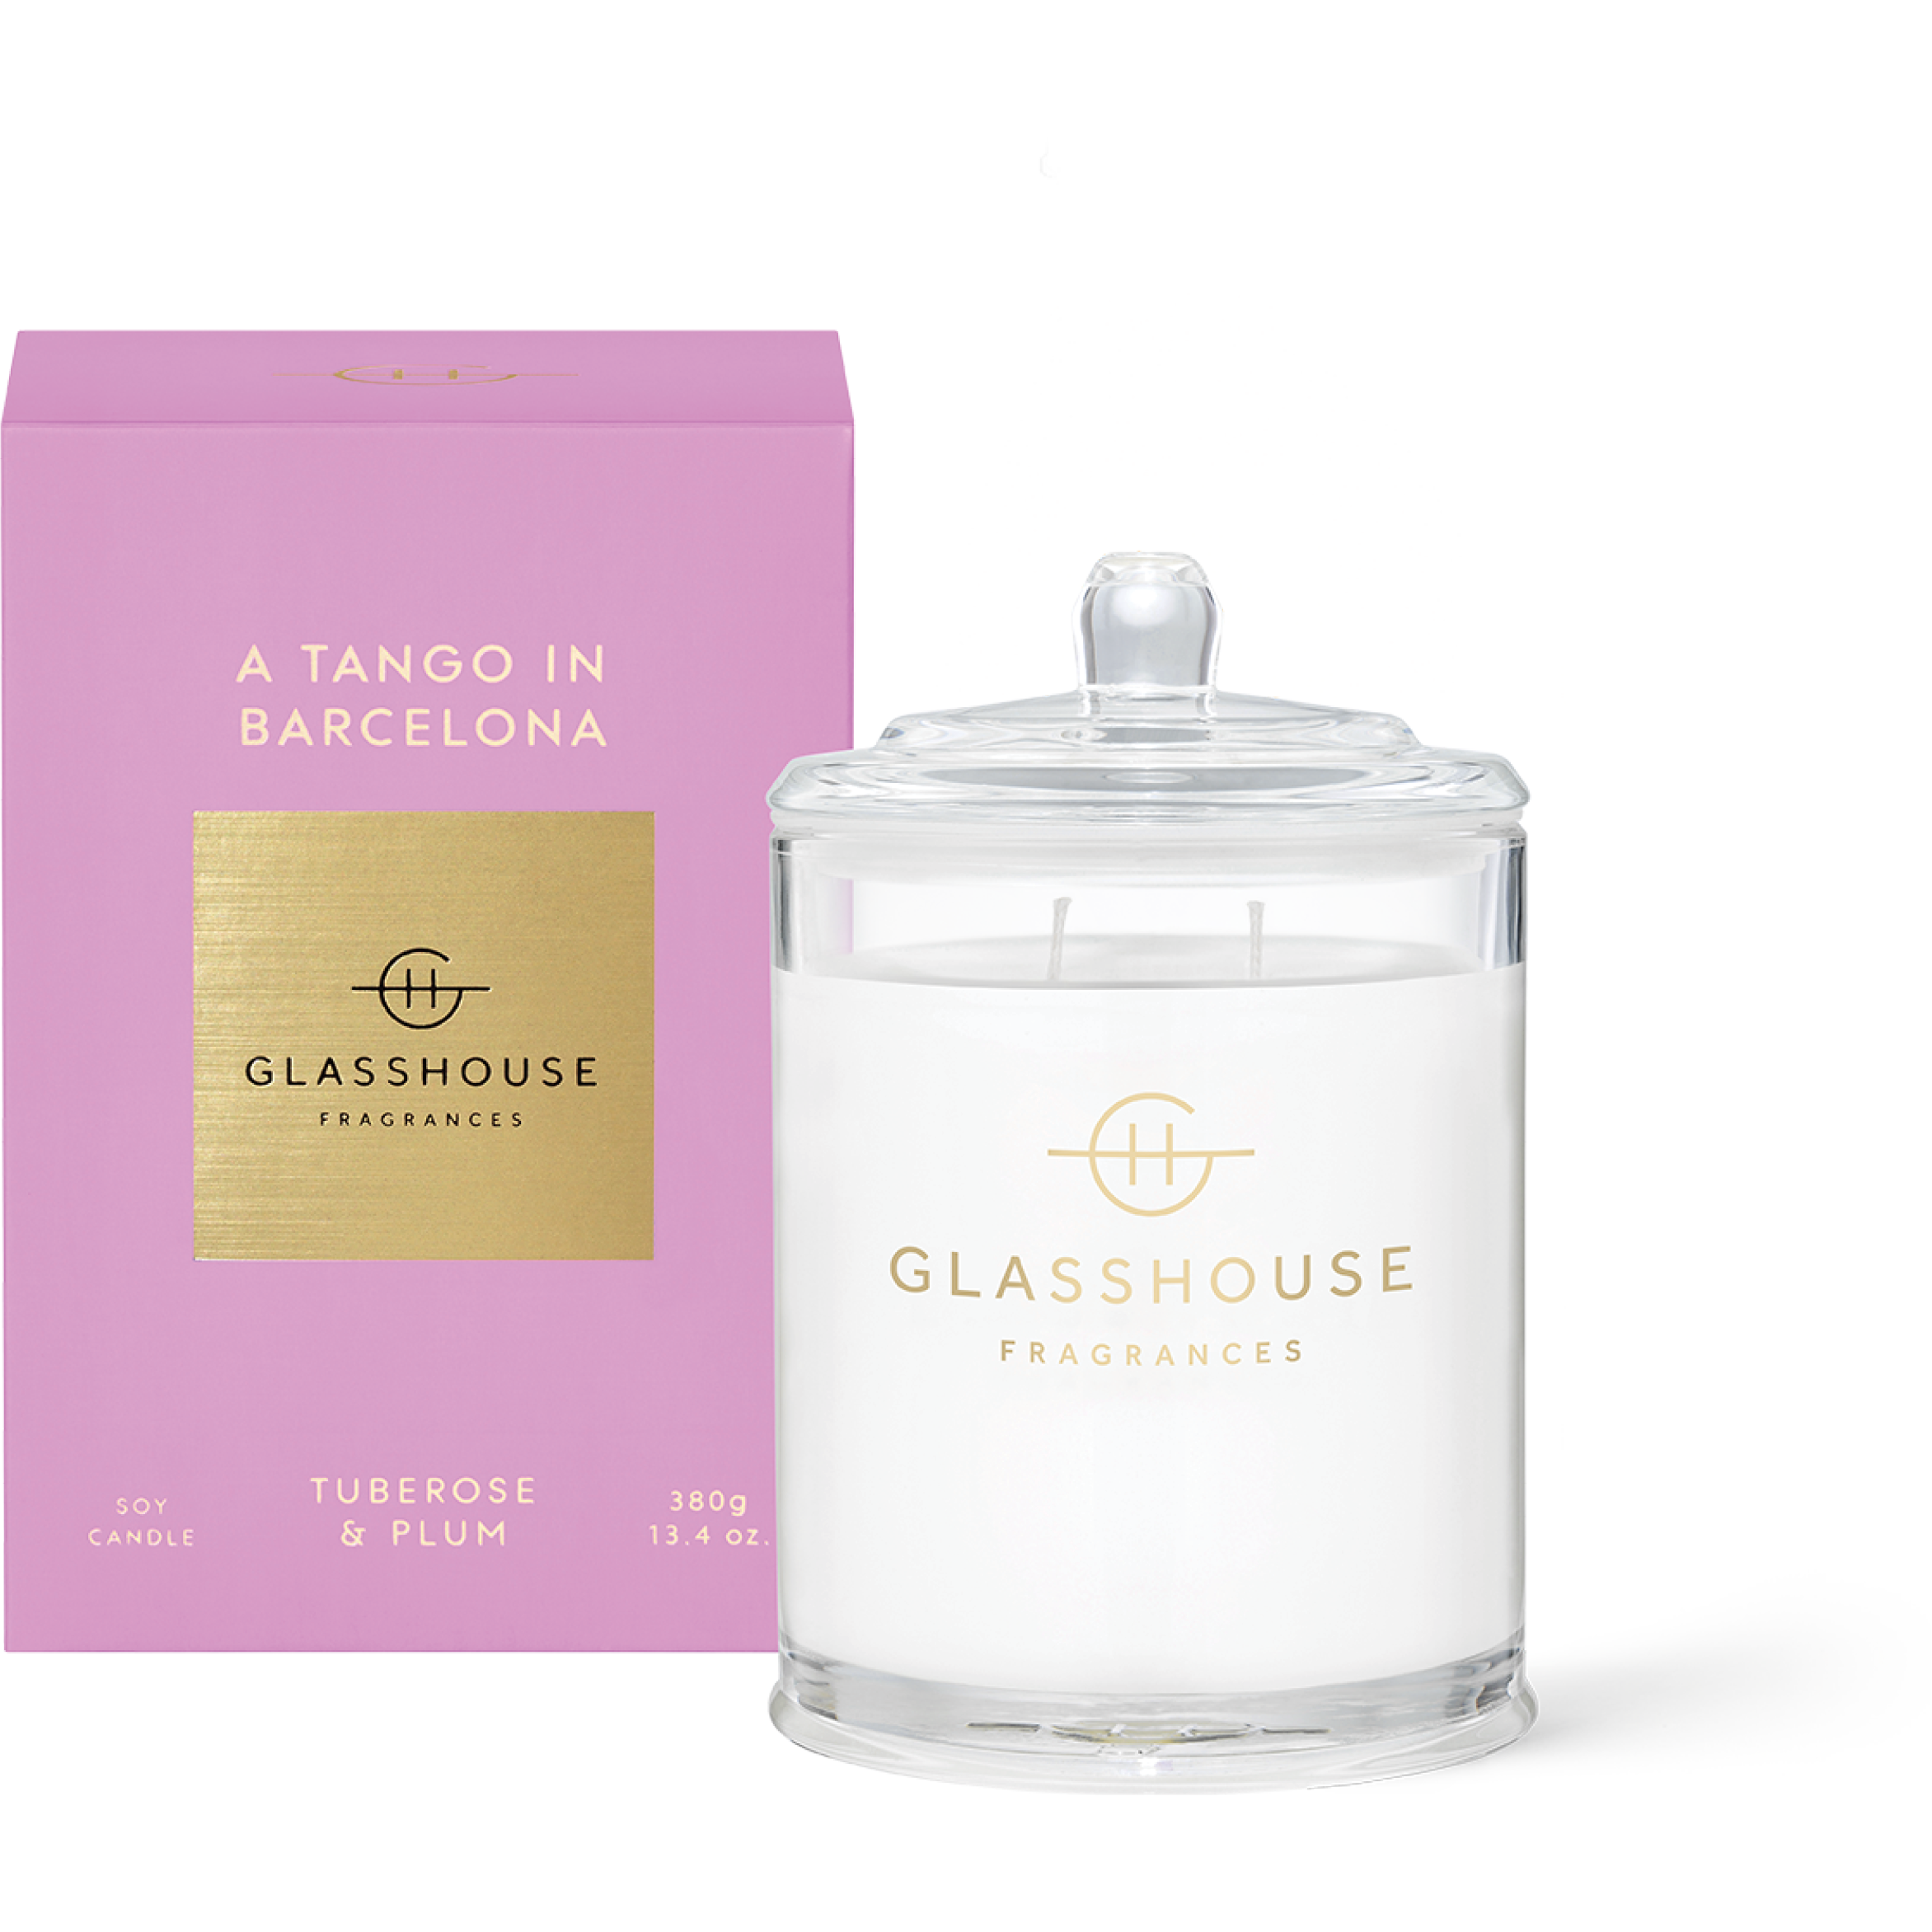 Glasshouse A TANGO IN BARCELONA Candle